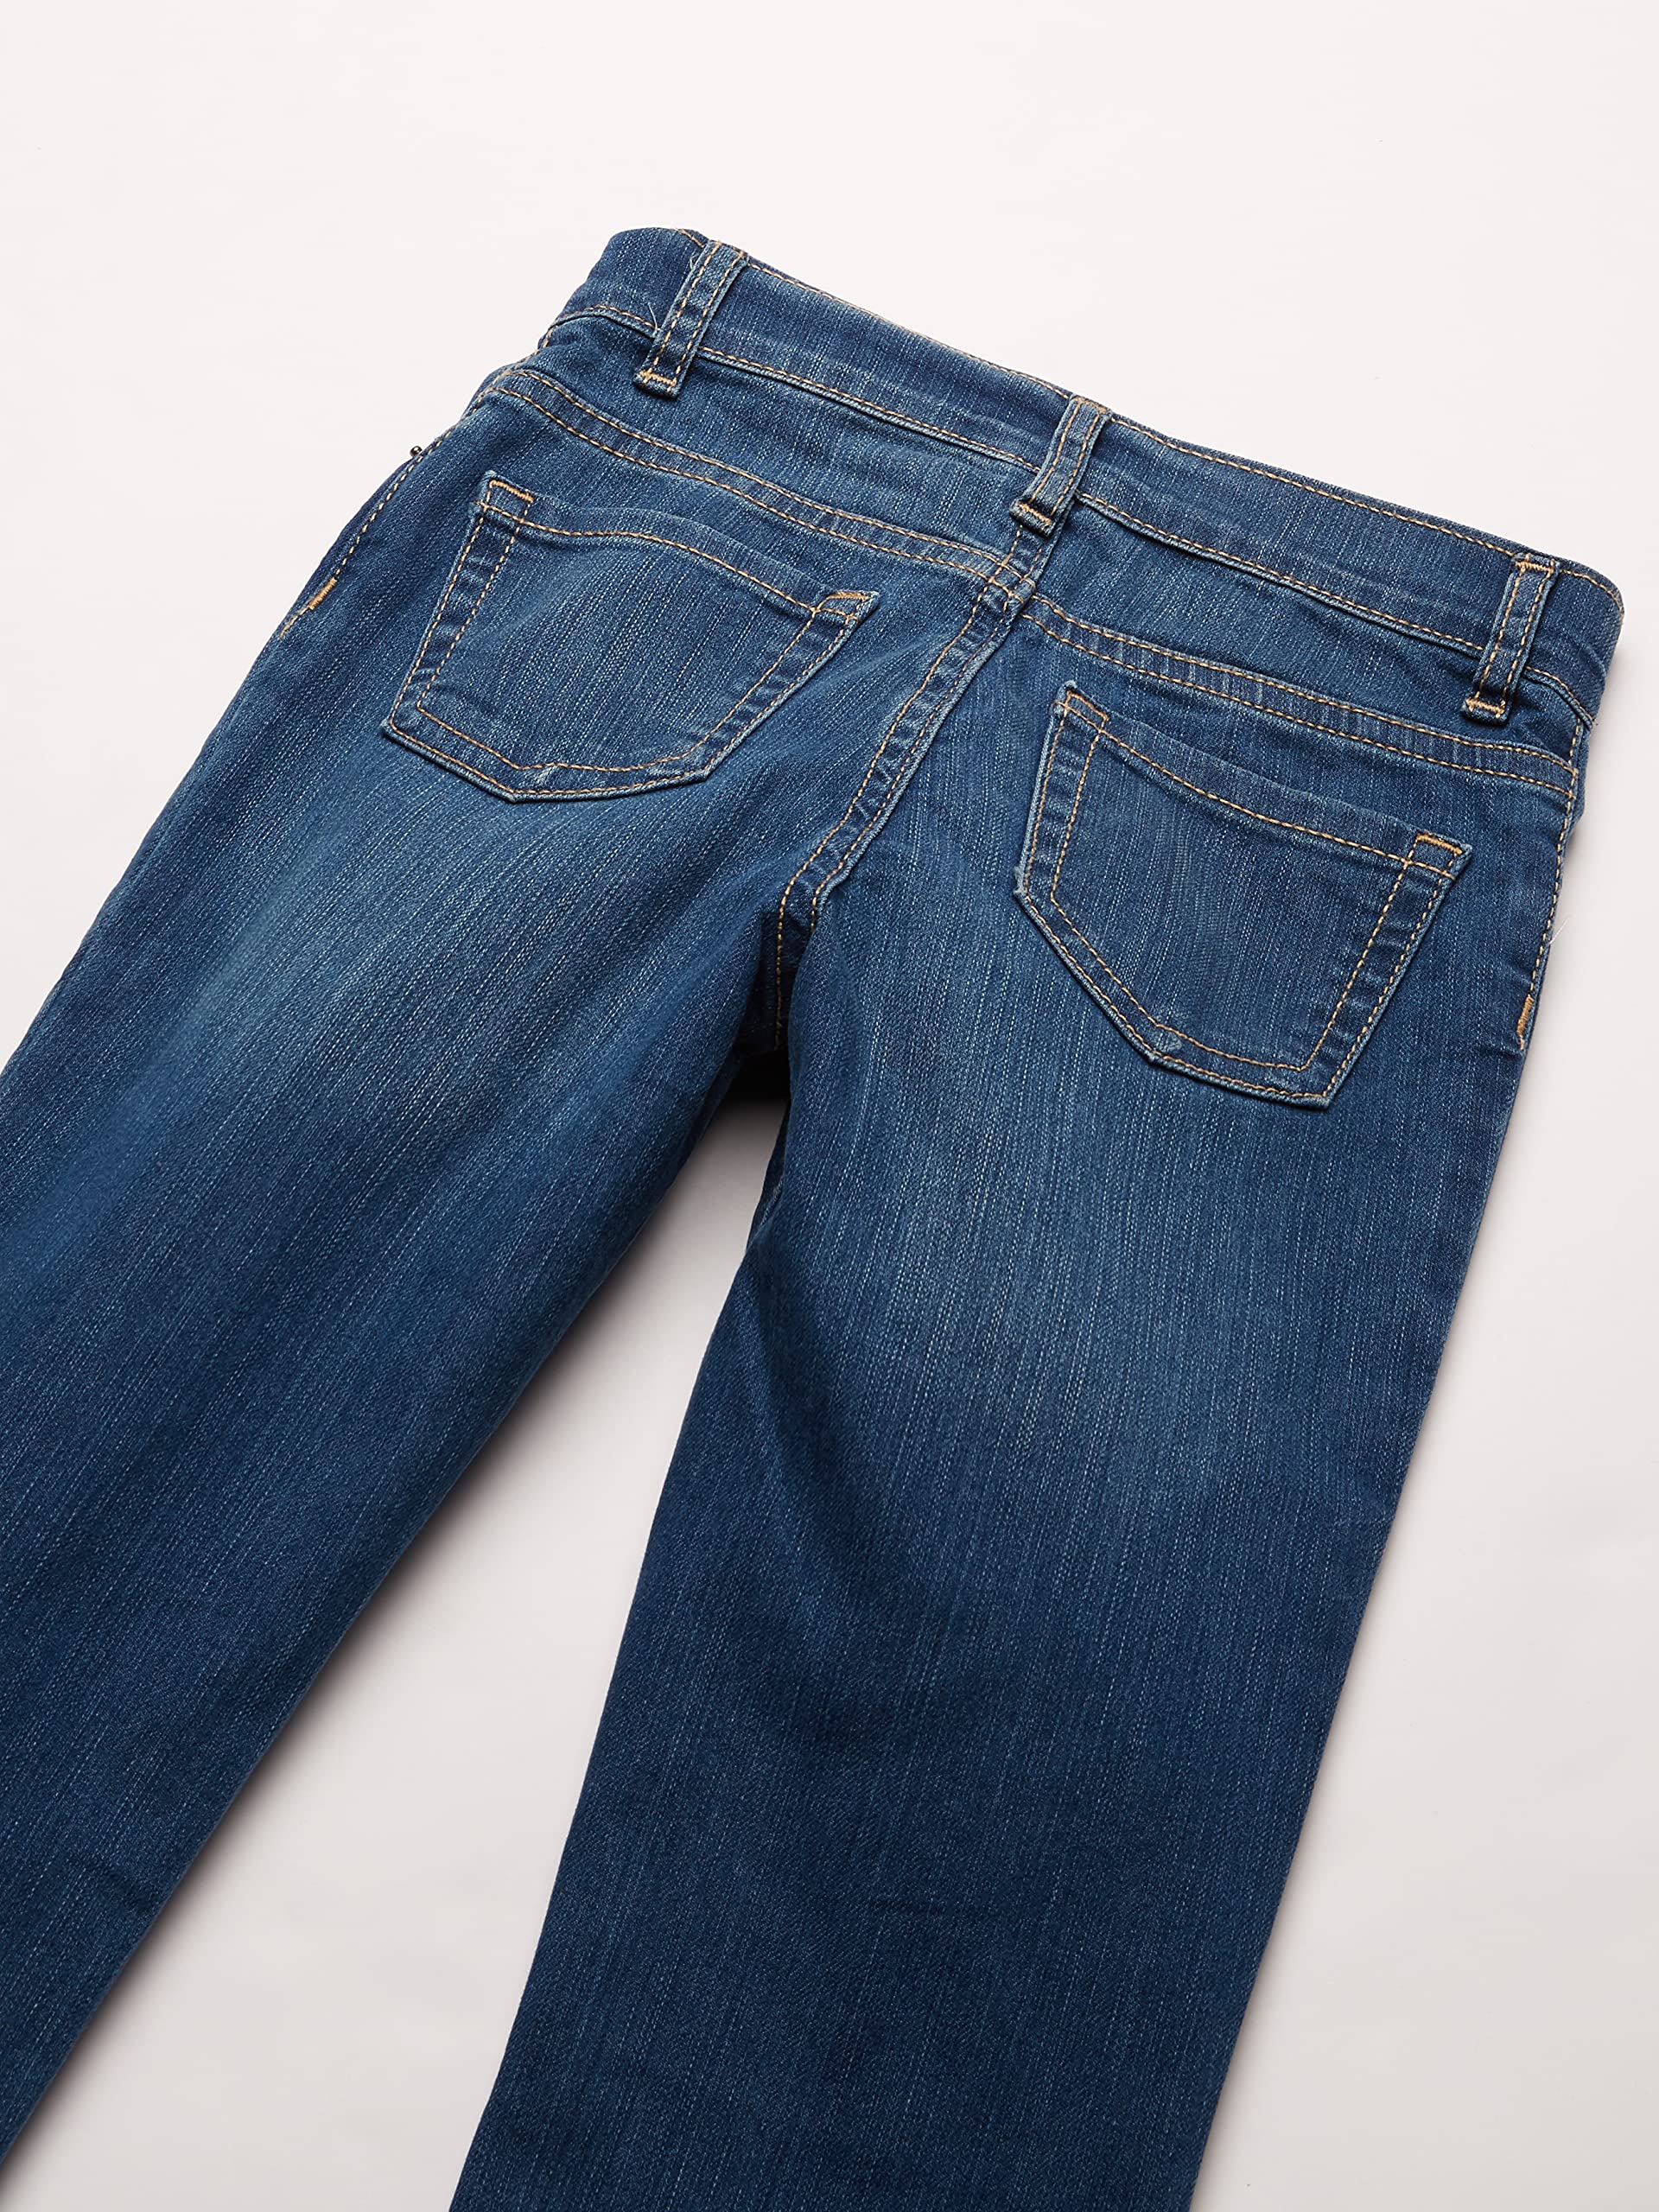 The Children's Place Girls' Basic Bootcut Jeans